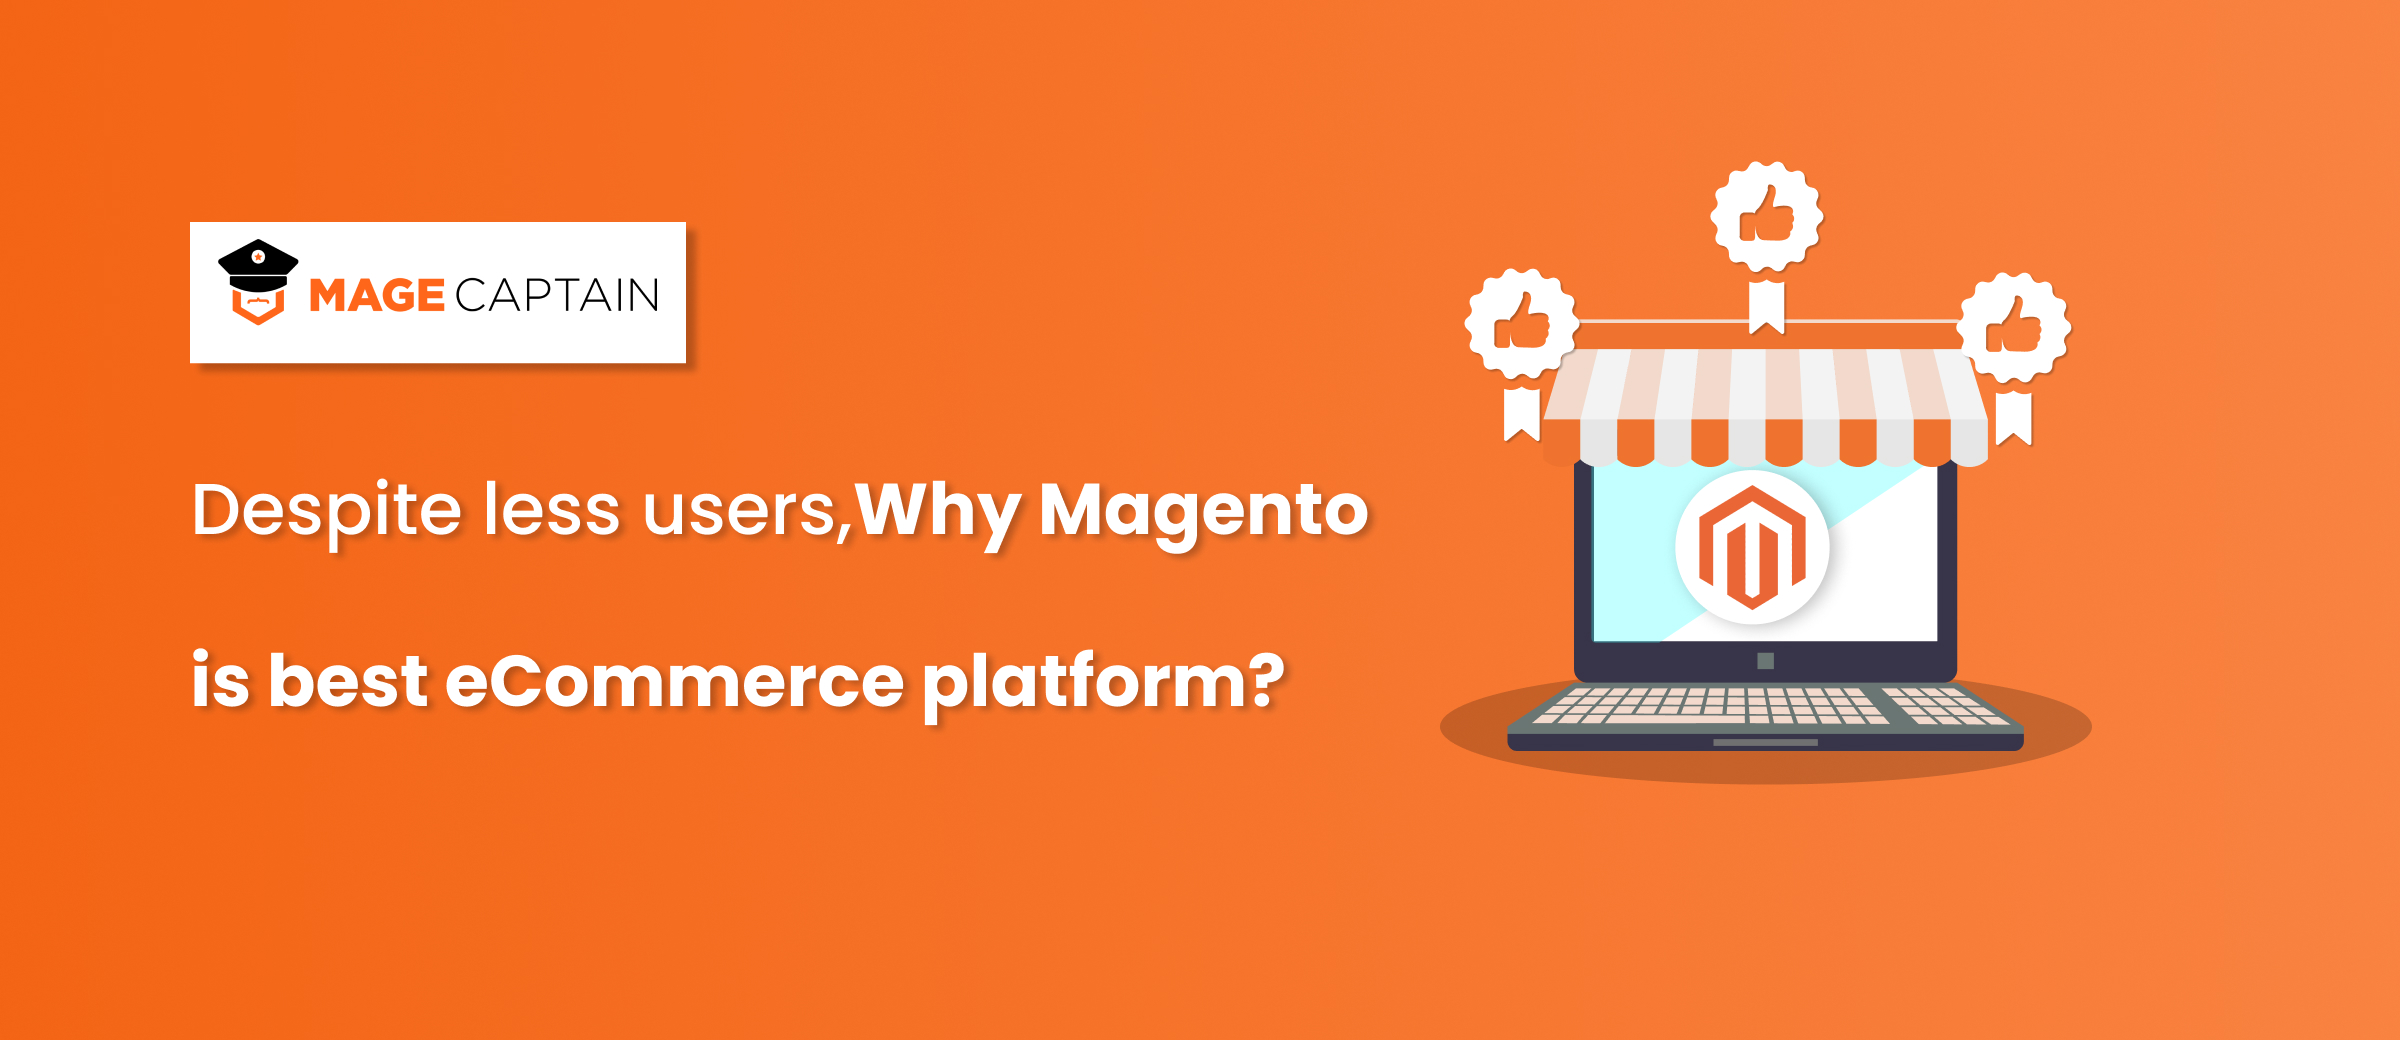 Why Magento is Still Best For eCommerce Businesses Despite Reducing Users